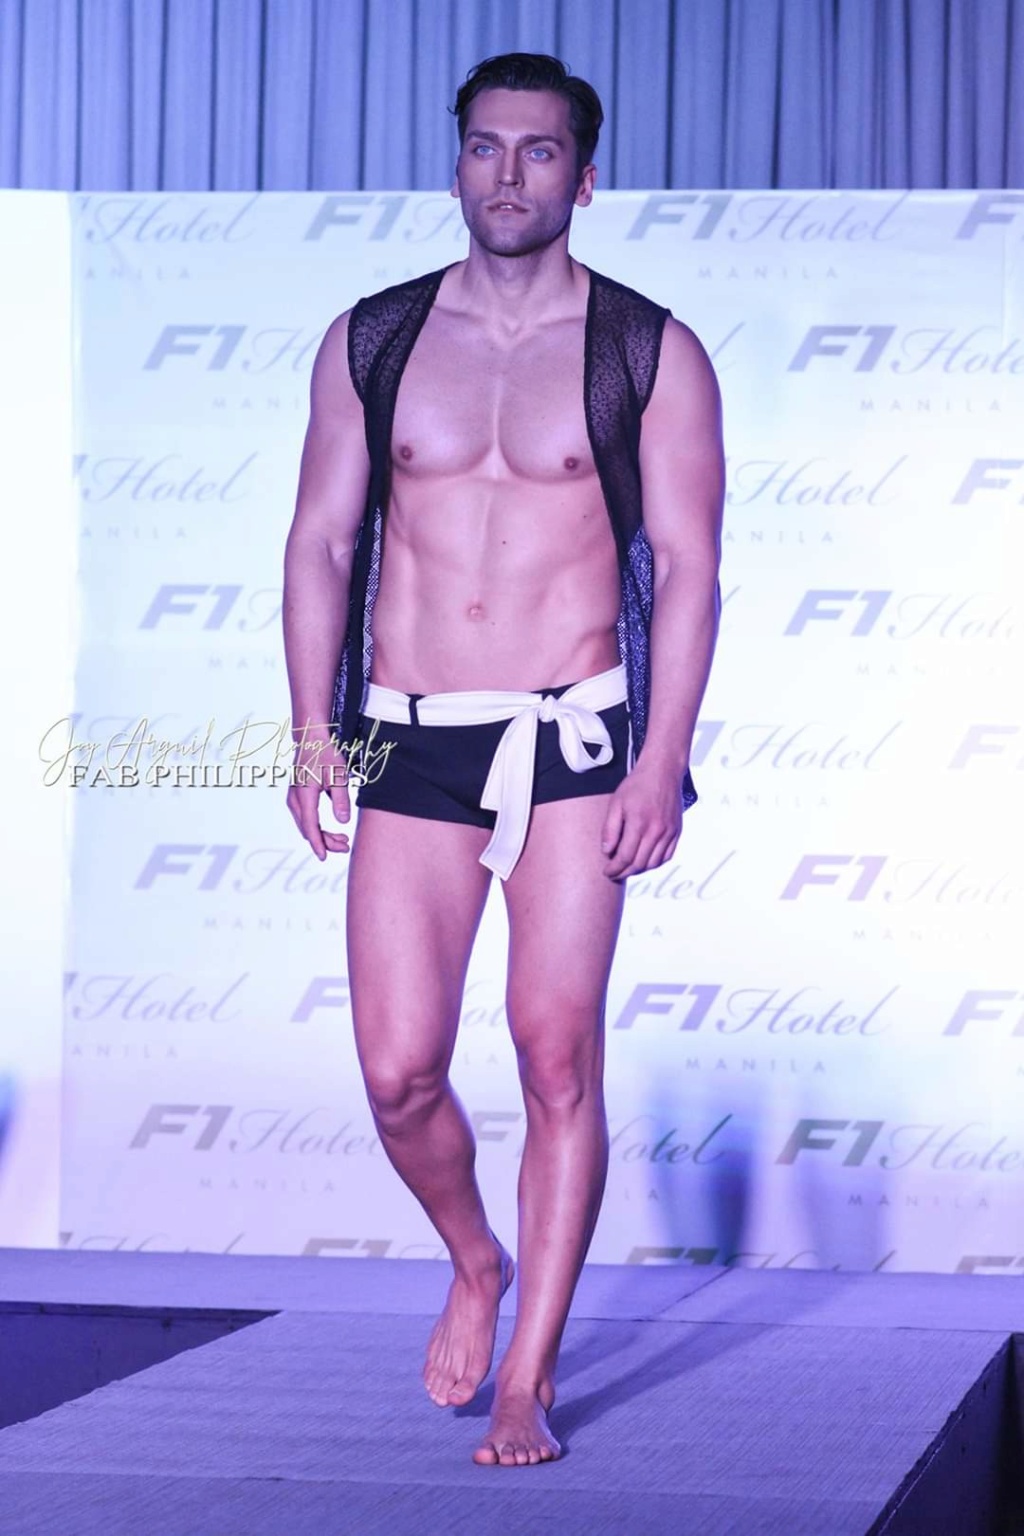 Road to the 20th Edition of Manhunt International will be held in the Philippines on February 2020 - Page 3 Fb_img52